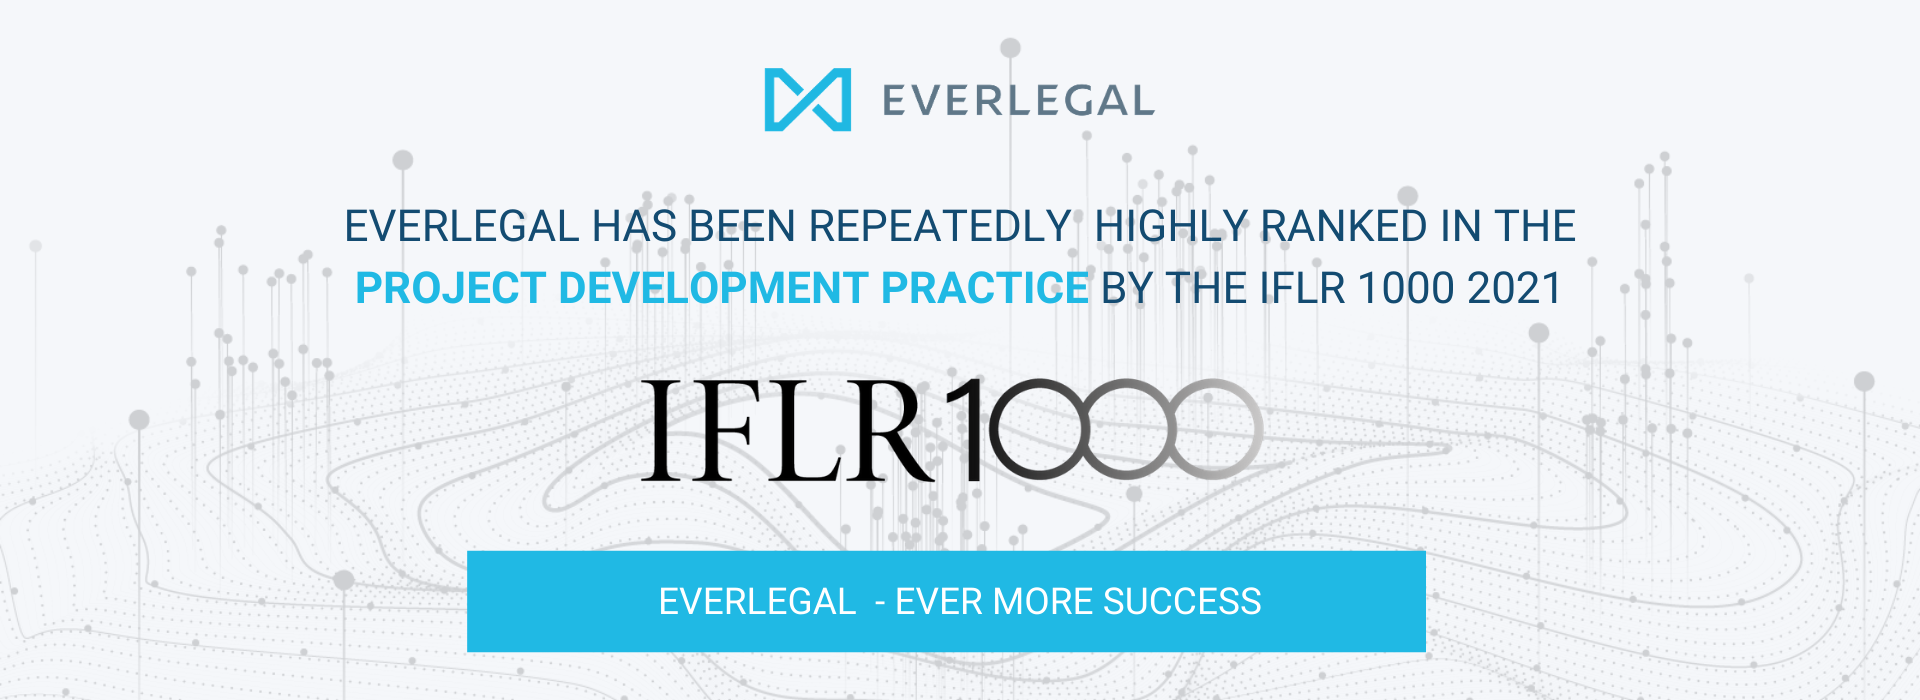 EVERLEGAL Has Been Repeatedly Highly Ranked in the Project Development Practice by the IFLR 1000 2021